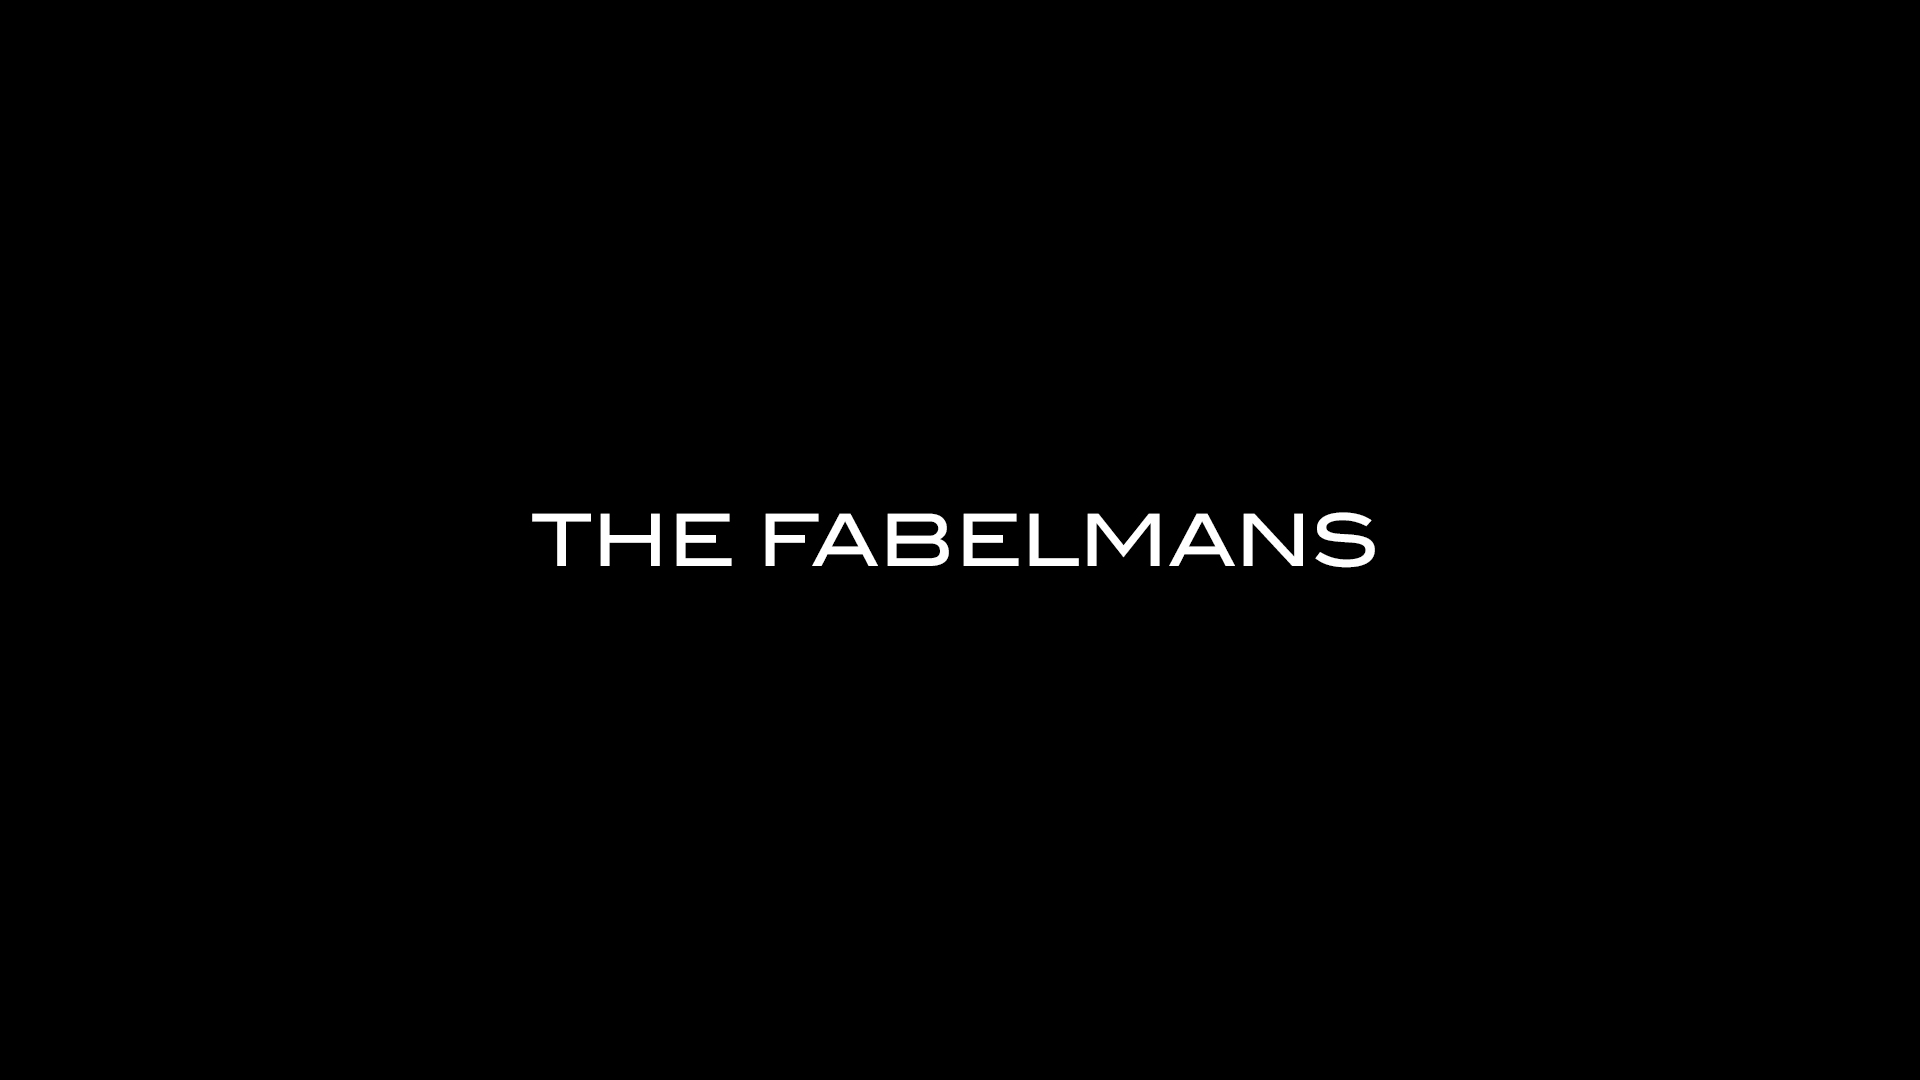 The Fabelmans Cast, Role, Salary, Director, Producer, Trailer